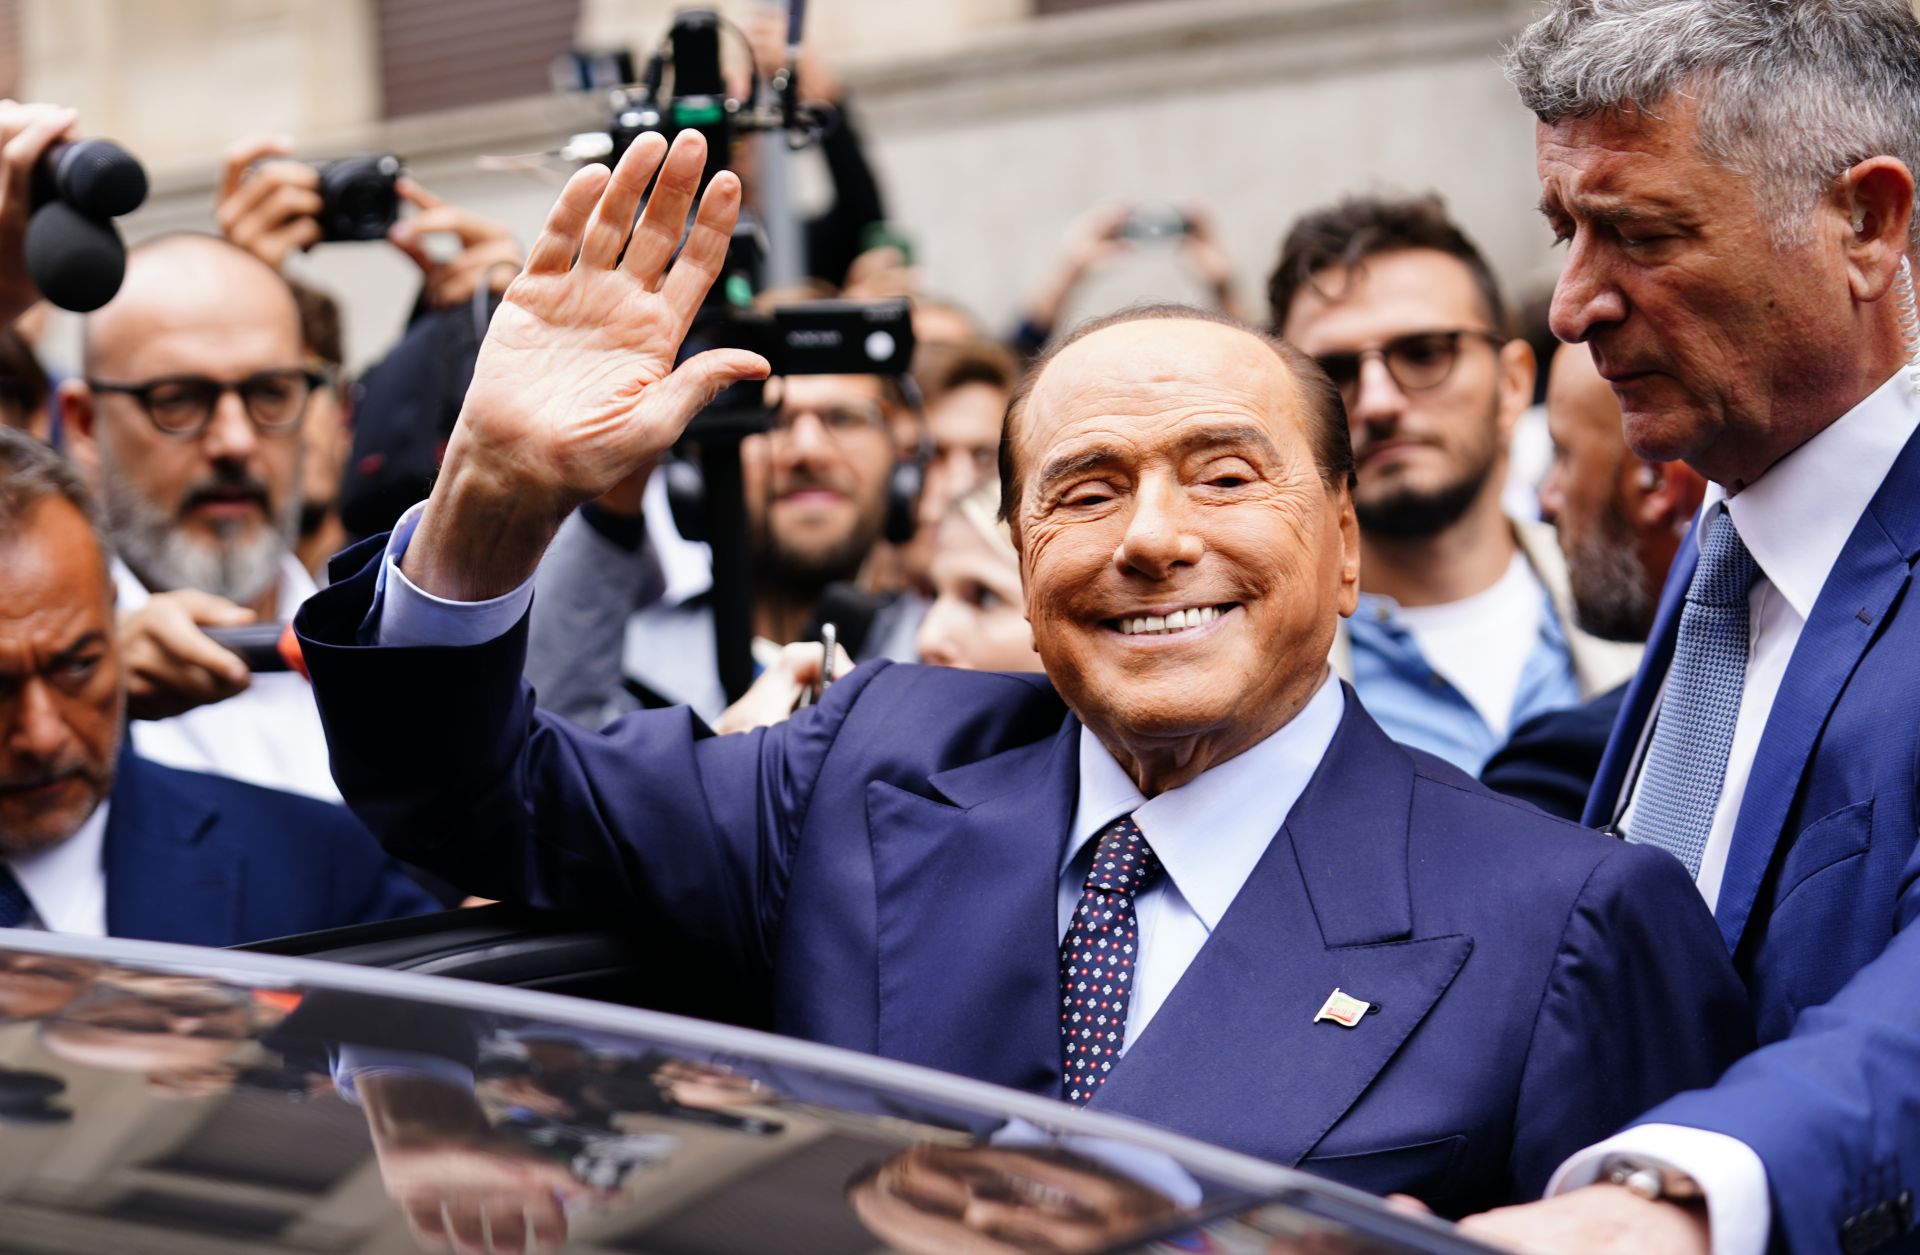 Silvio Berlusconi leaves a polling station after voting in Italy's September 2022 snap election. The former prime minister died on June 12, 2023, at the age of 86.